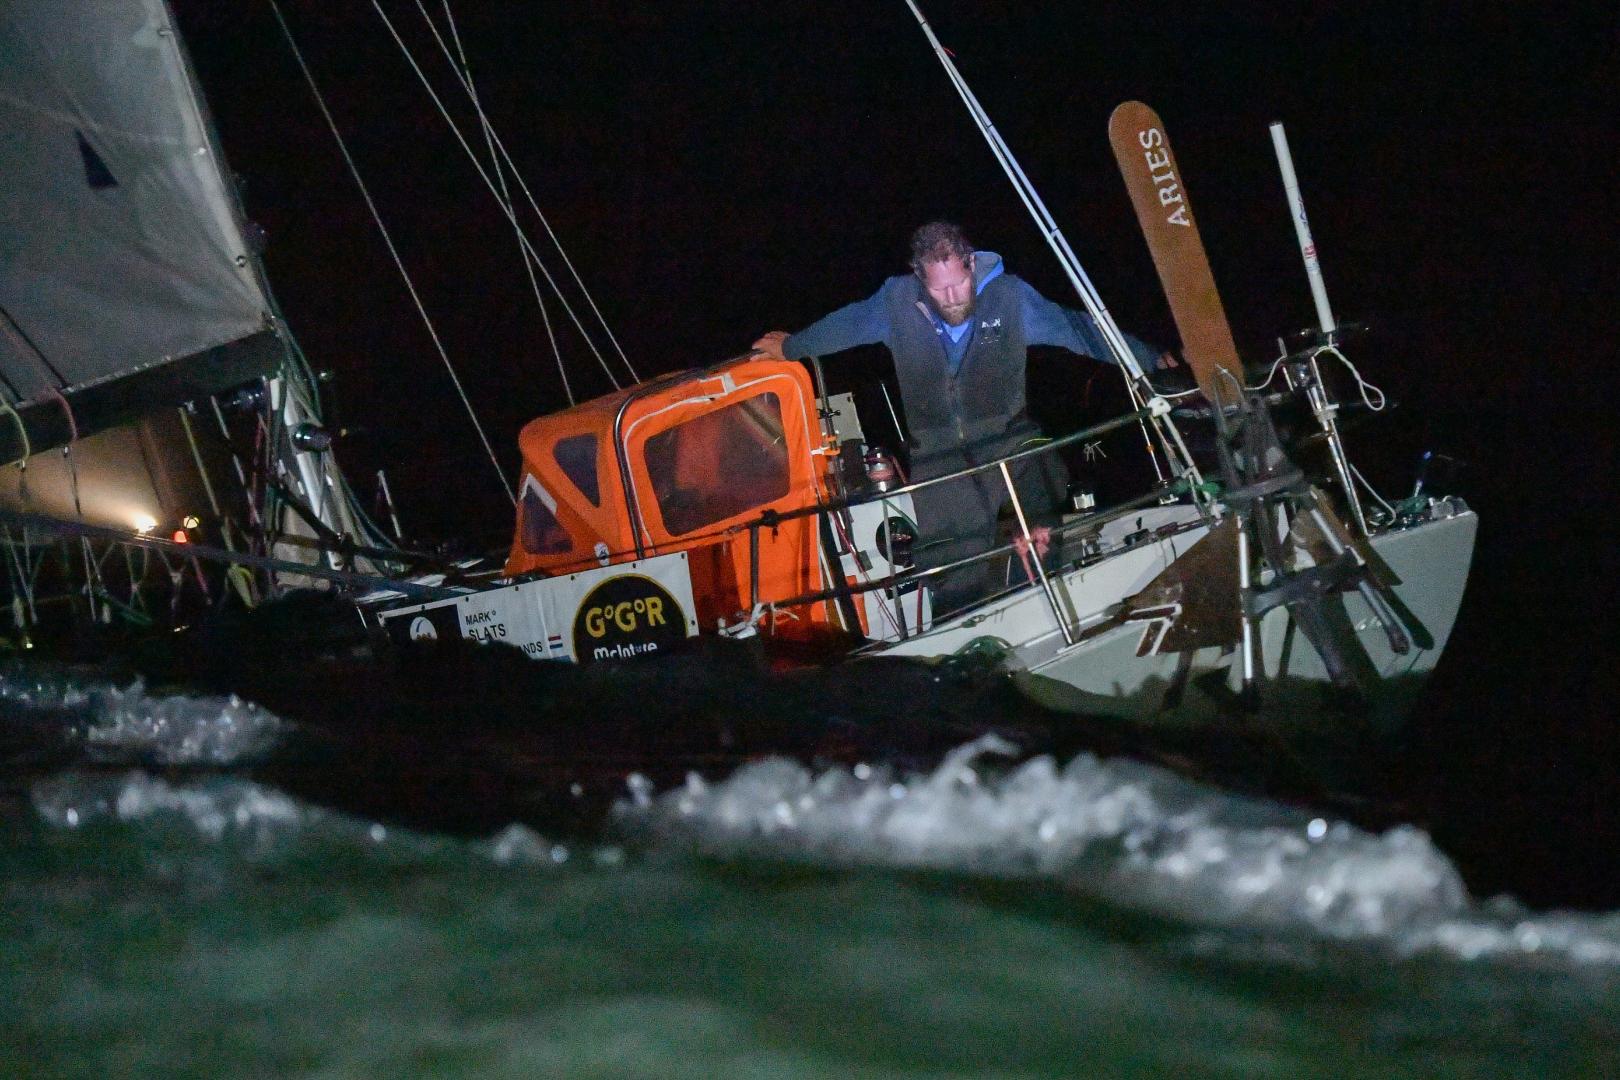 Mark Slats arriving off Les Sables d'Olonne to take 2nd place in the 2018 Golden Globe Race last night, All photos Christophe Favreau/GGR/PPL